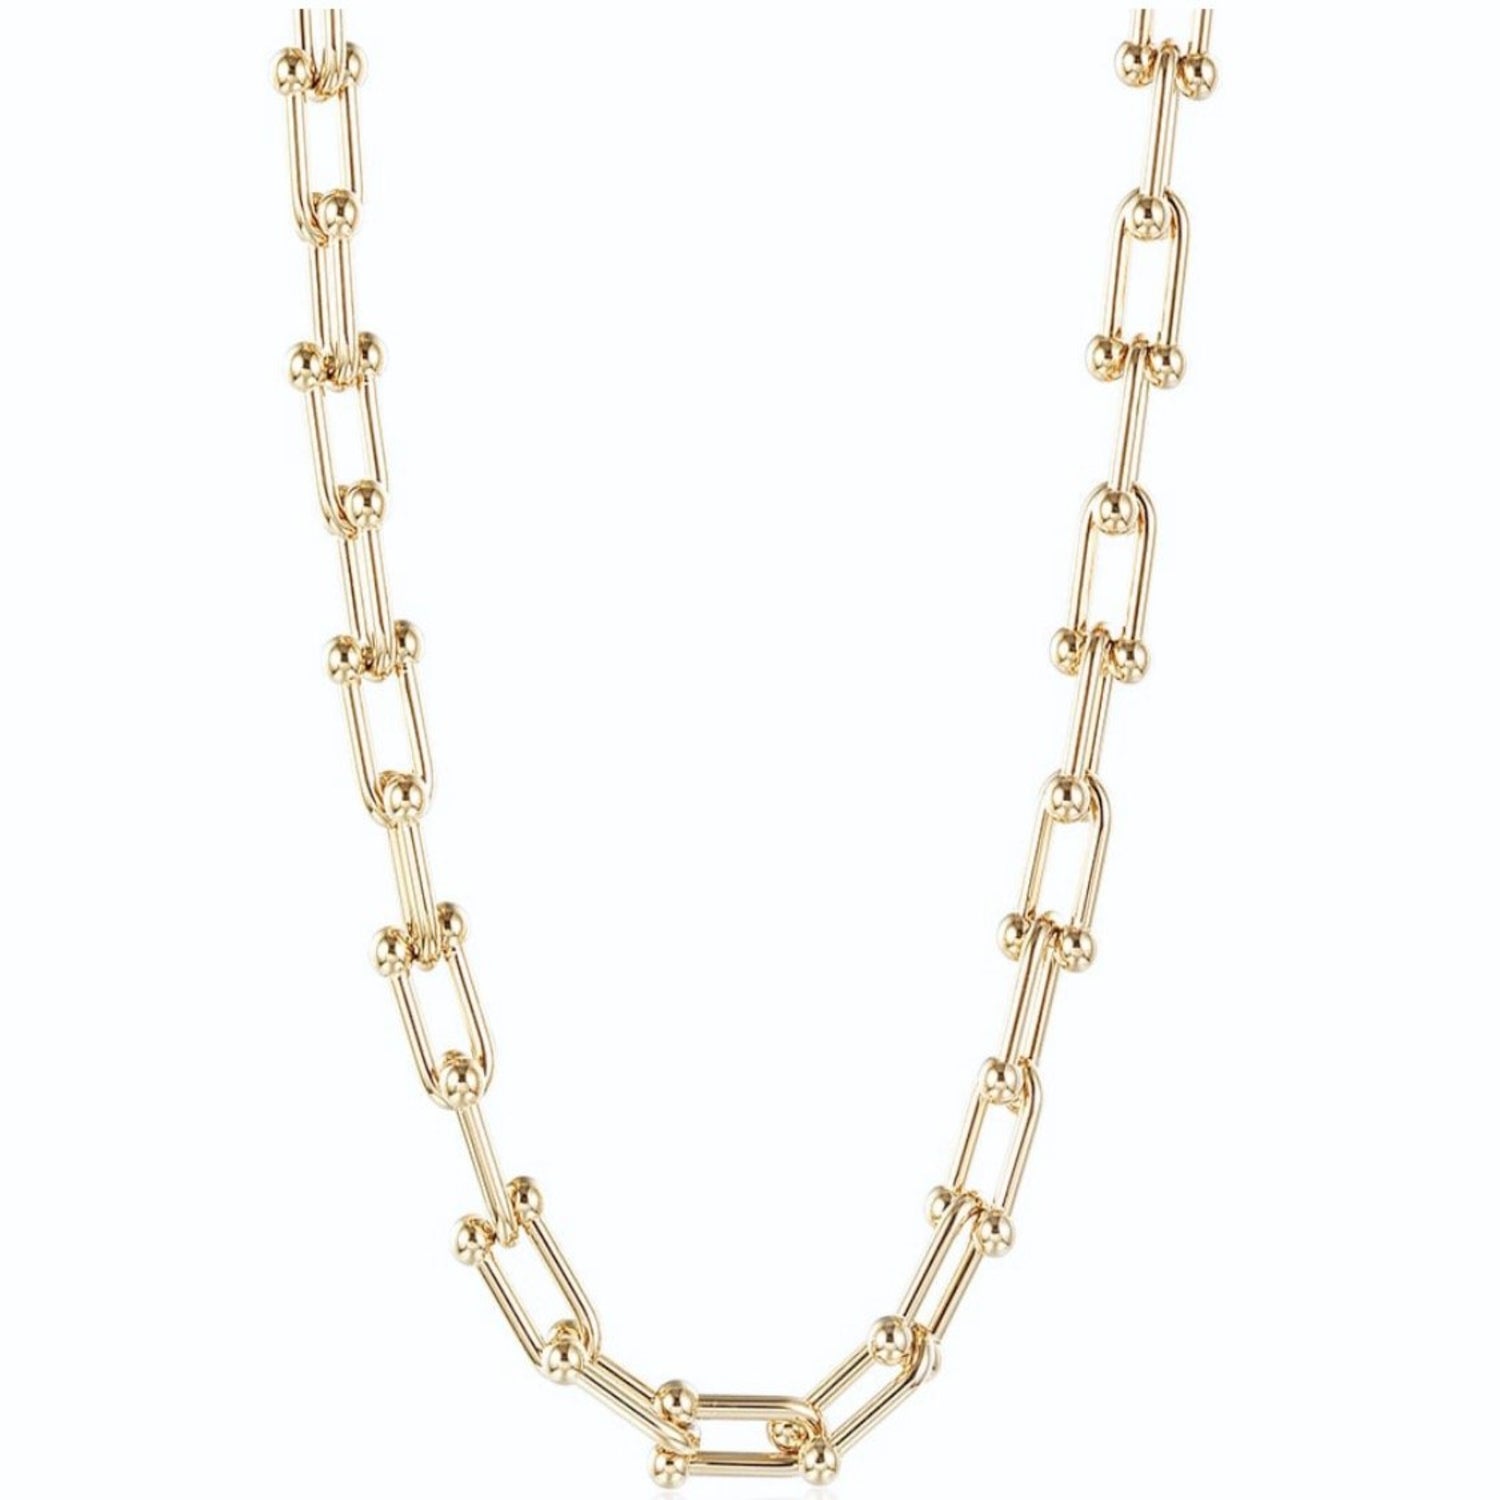 U link Chain necklace, gold-plated over stainless steel, water and sweat resistant jewelry, tarnish resistant jewelry, isvi boutique